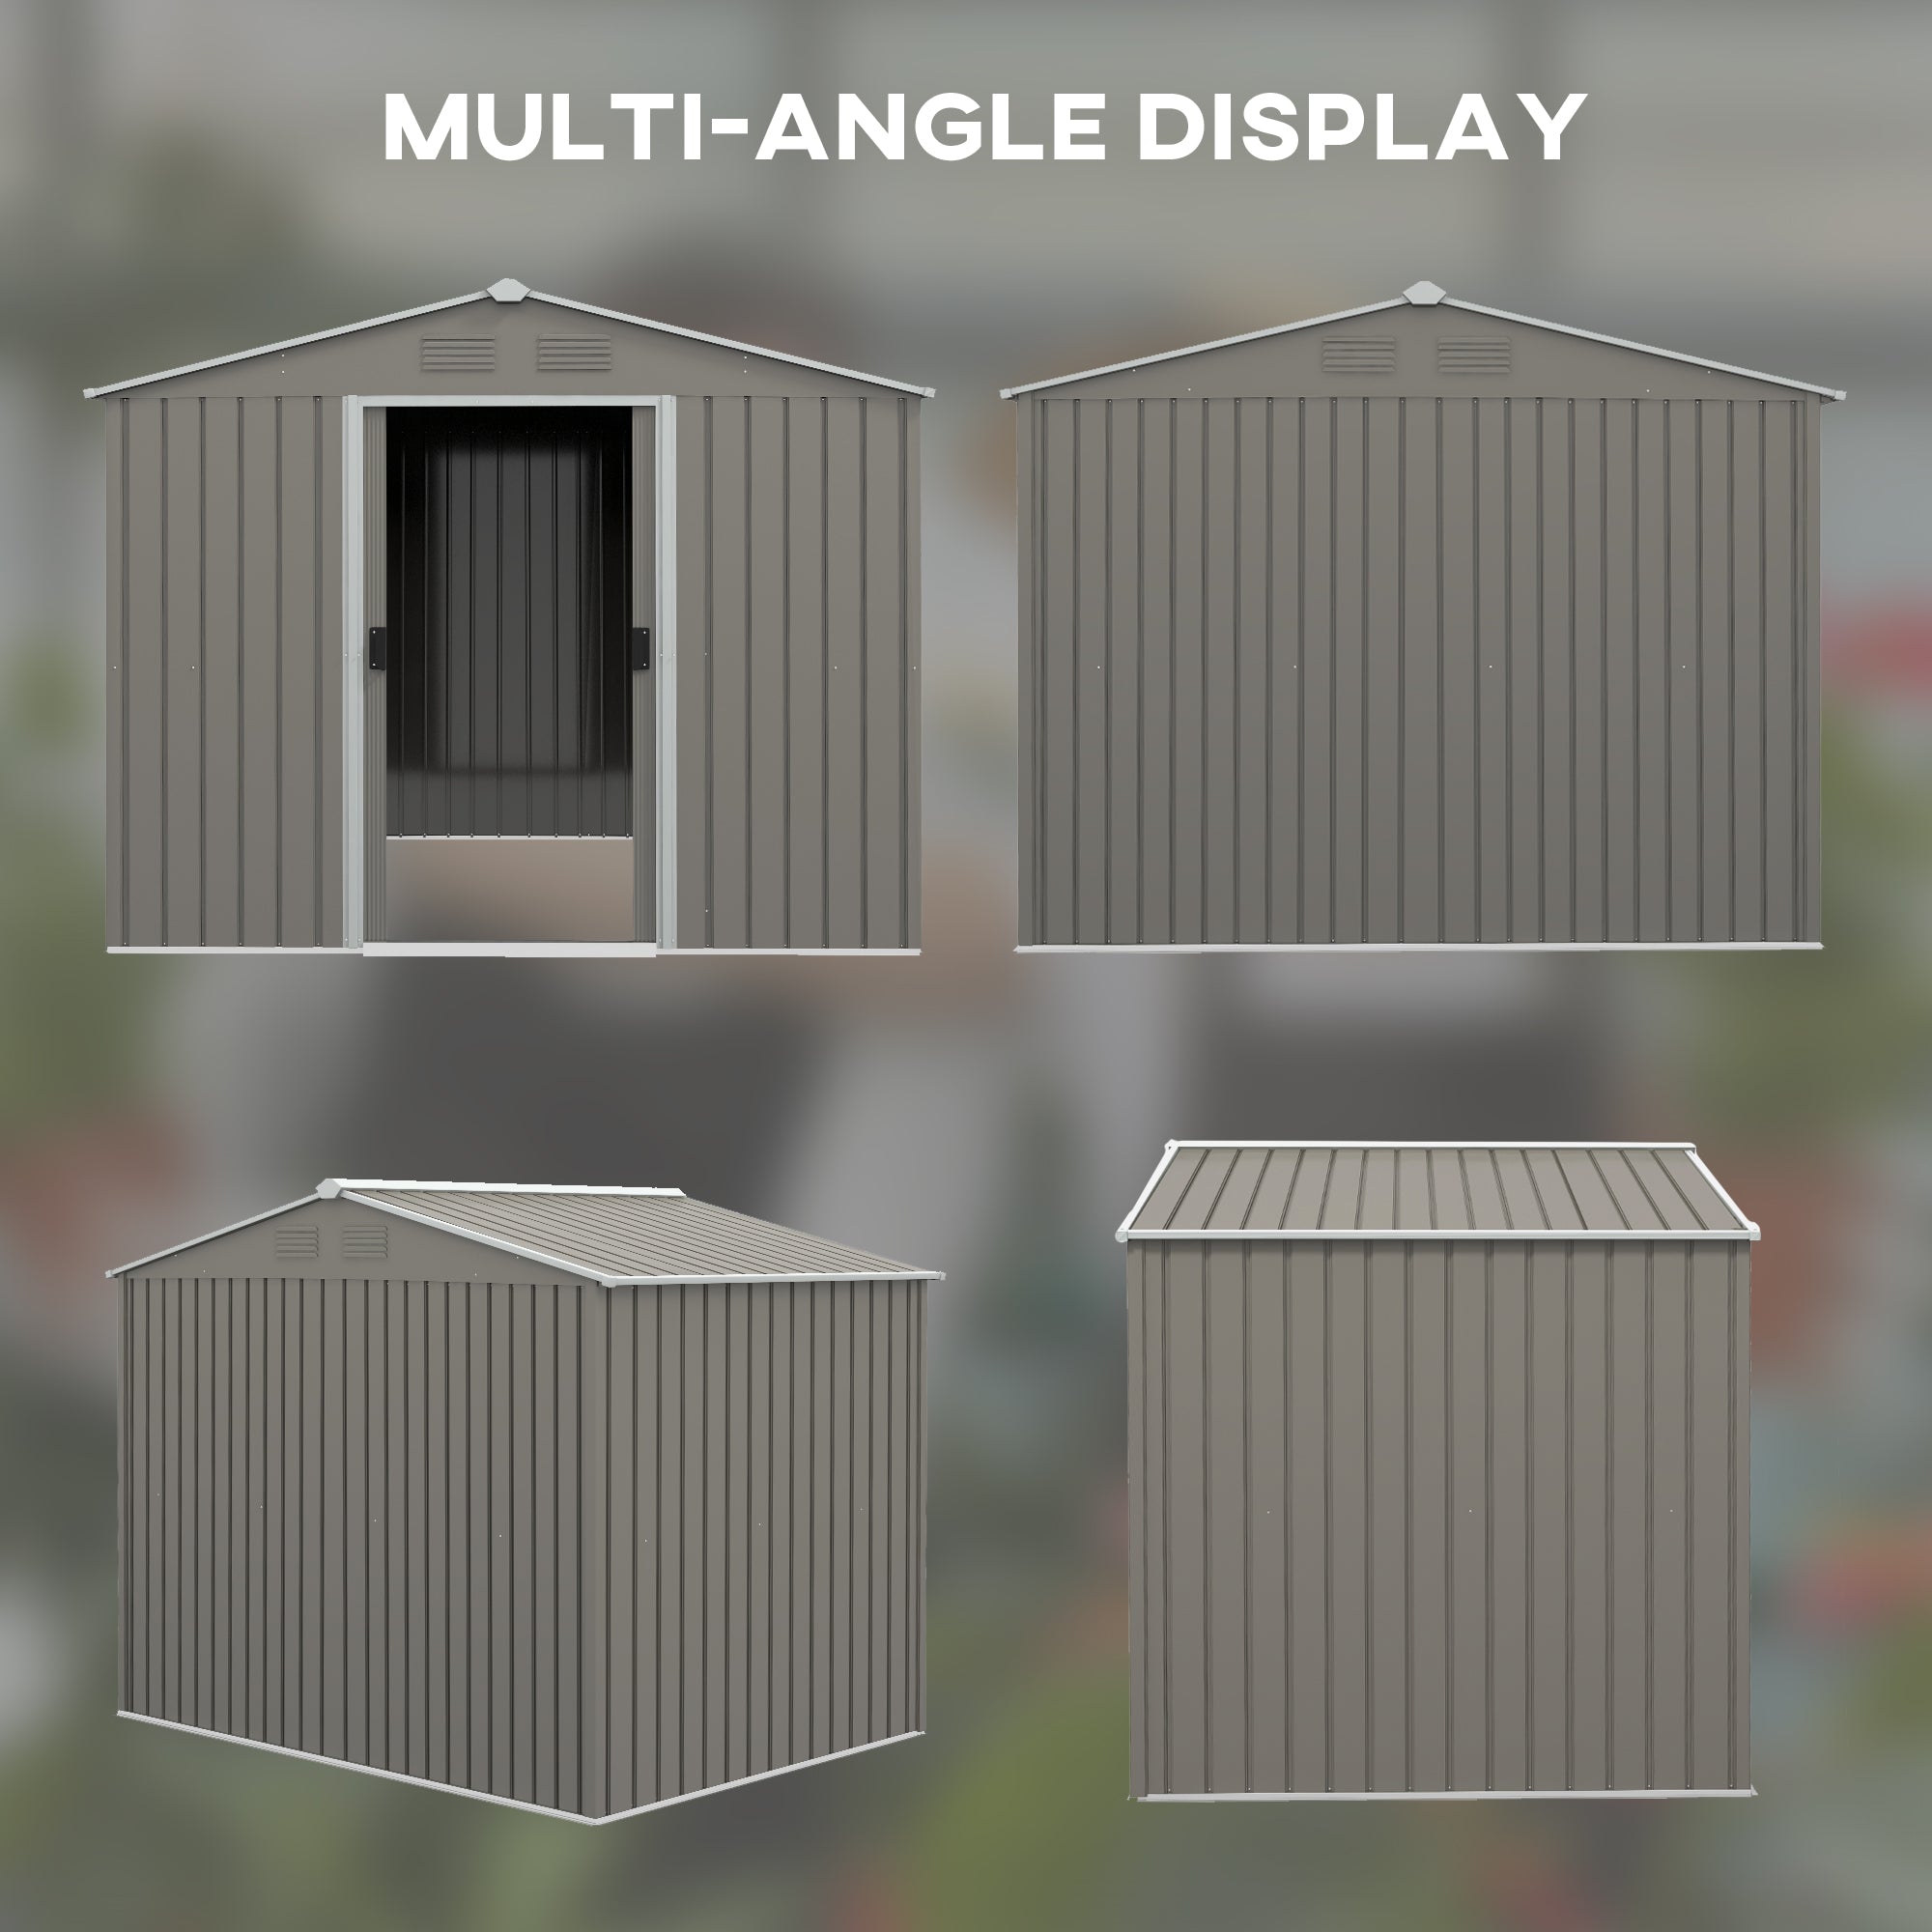 Outsunny 8 x 6ft Outdoor Garden Storage Shed, Metal Tool House with Ventilation and Sliding Doors, Light Grey